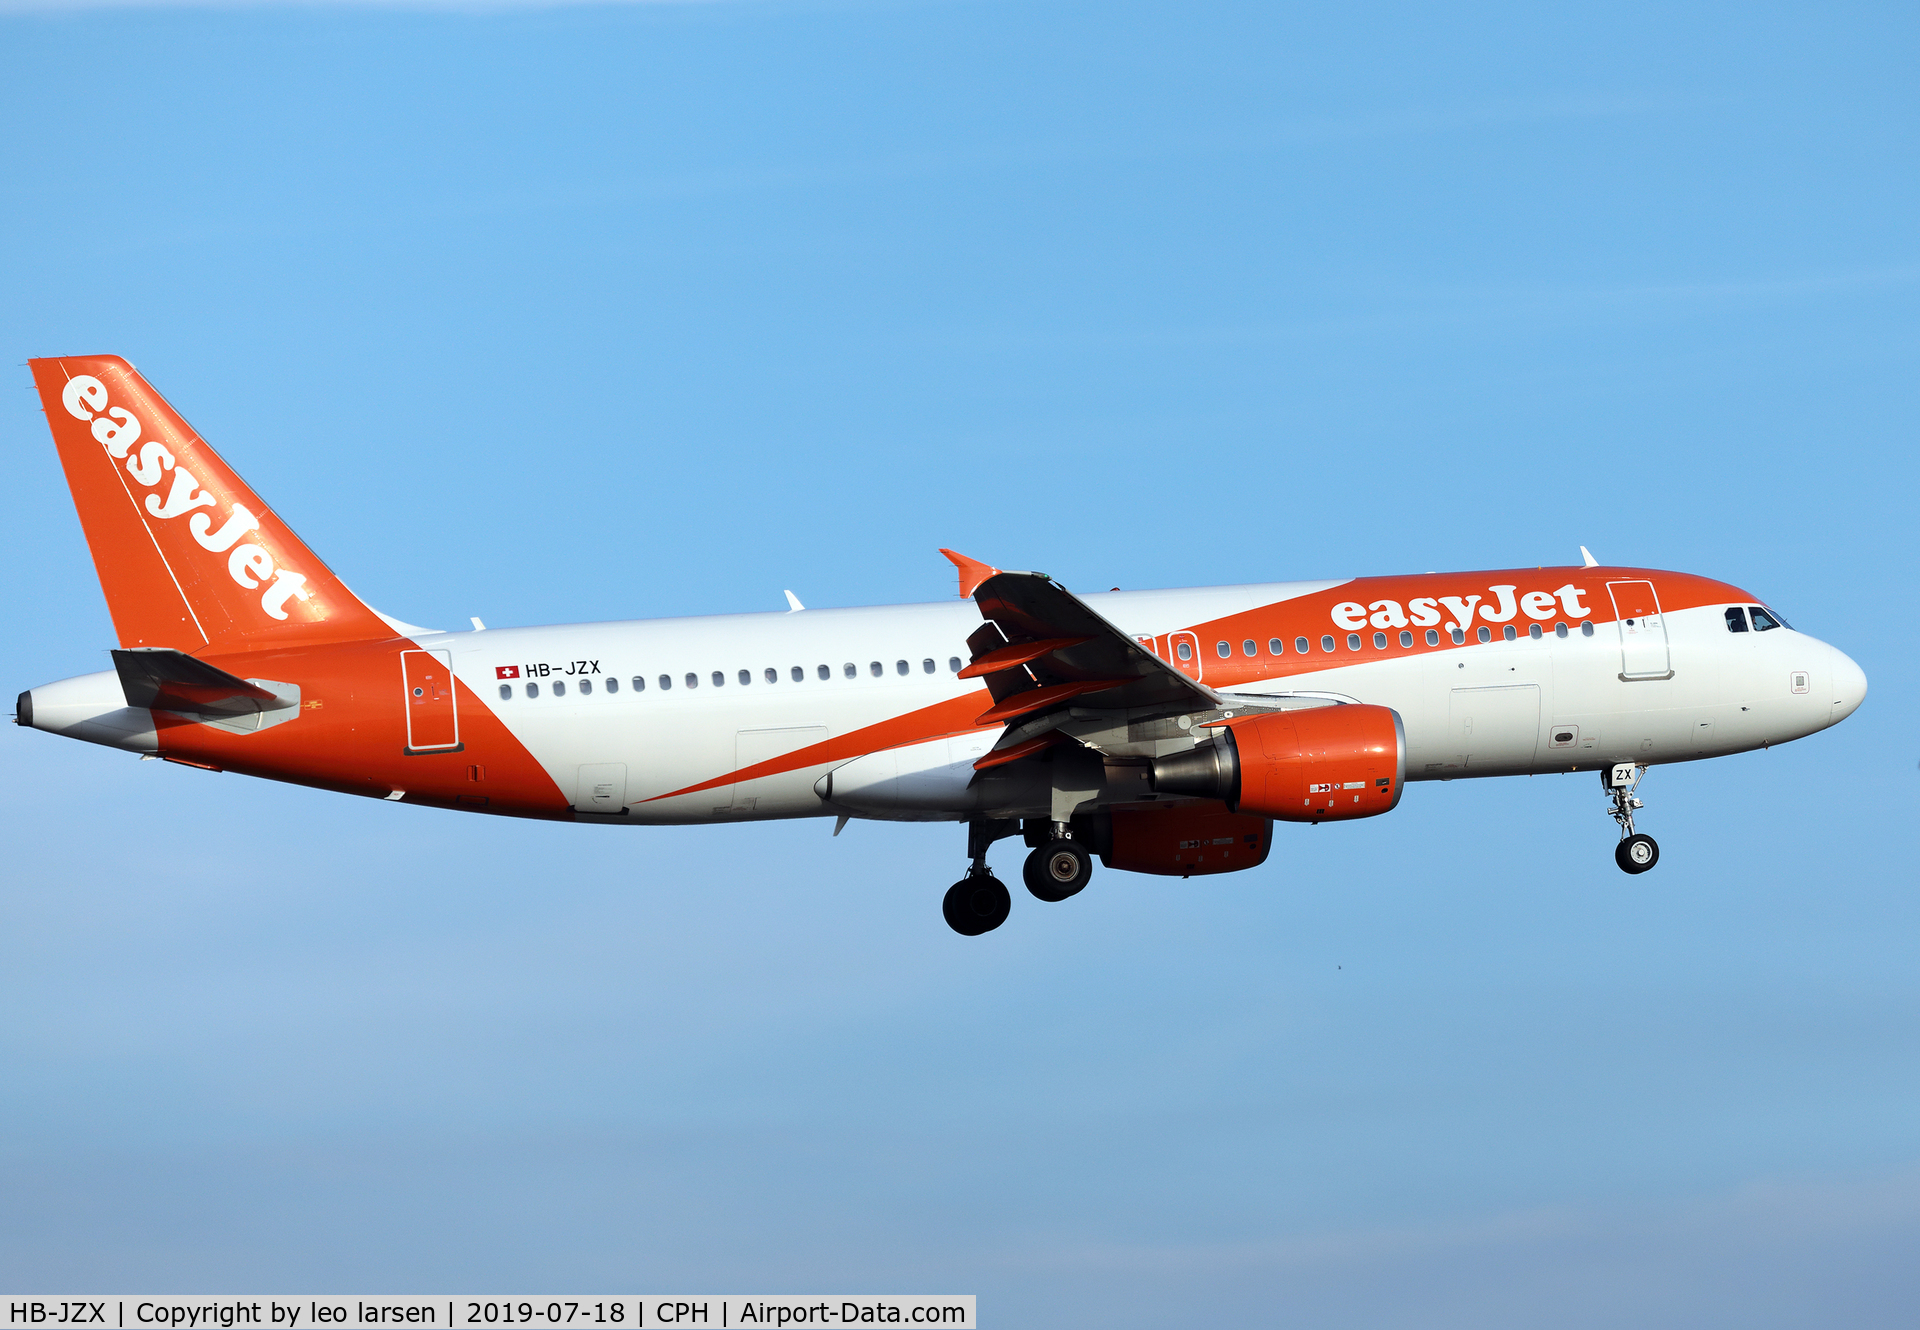 HB-JZX, 2009 Airbus A320-214 C/N 4157, Copenhagen 18.7.2019 on final to R-22L